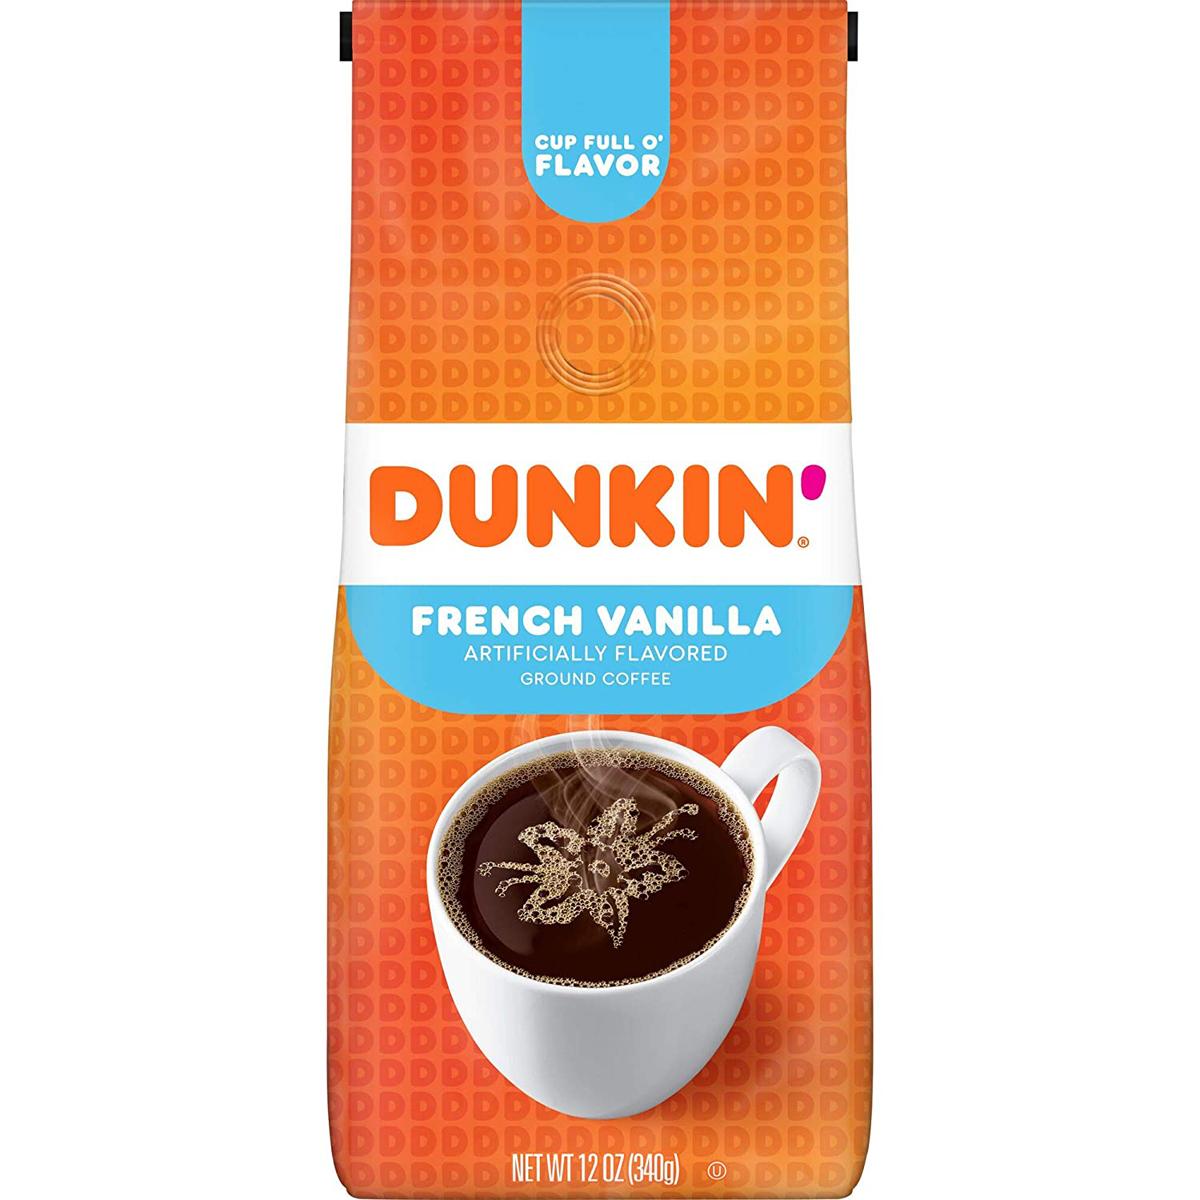 12-Oz Dunkin French Vanilla Ground Coffee for $3.74 Shipped